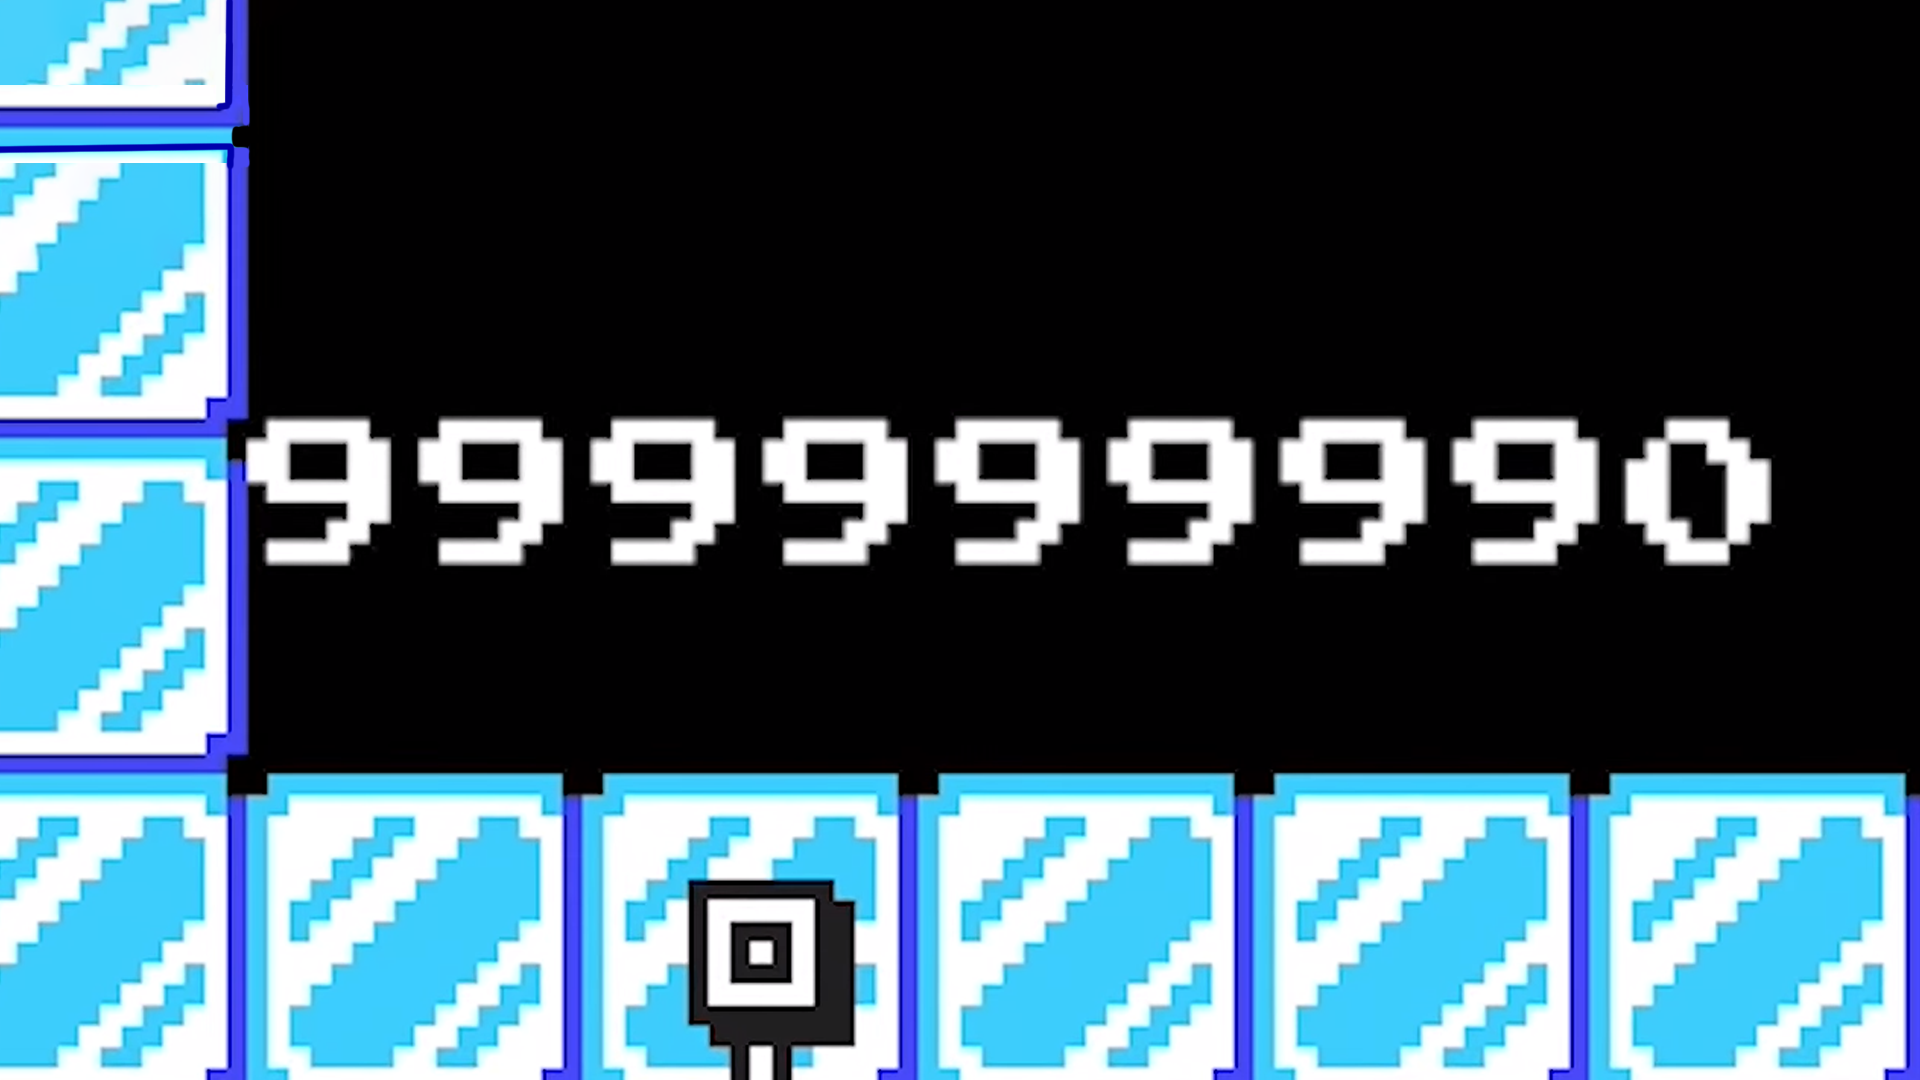 Getting The Highest Score Possible In Mario Maker 2 Is Harder Than You Might Expect